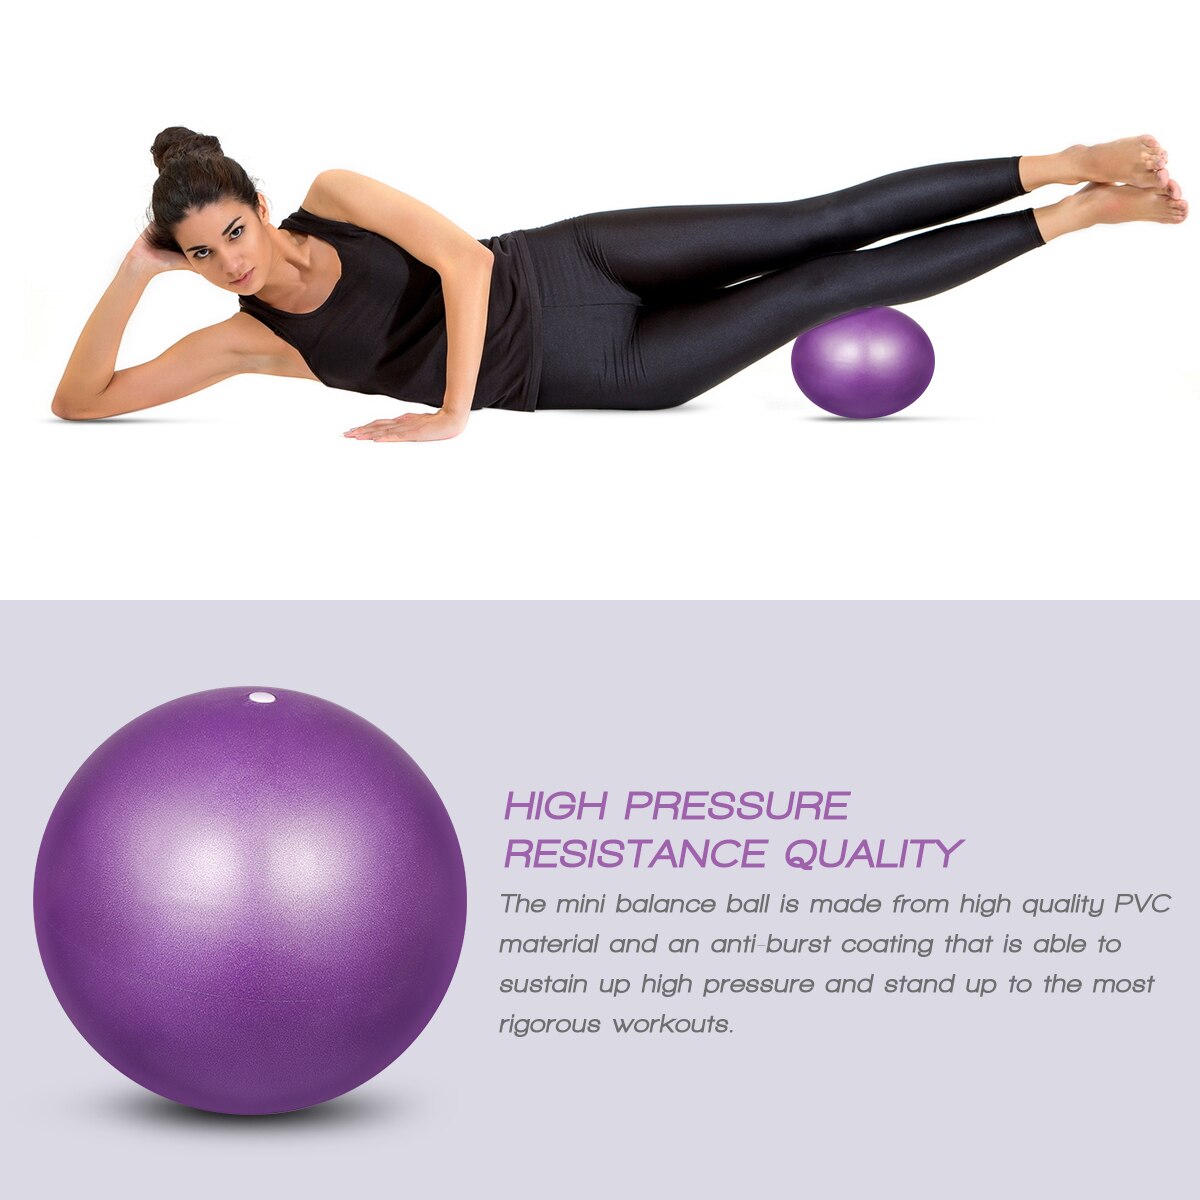 VORCOOL Yoga Pilates Ball Small Exercise Ball Abdominal Workouts And Shoulder Rehabilitation Exercises Core Strengthening